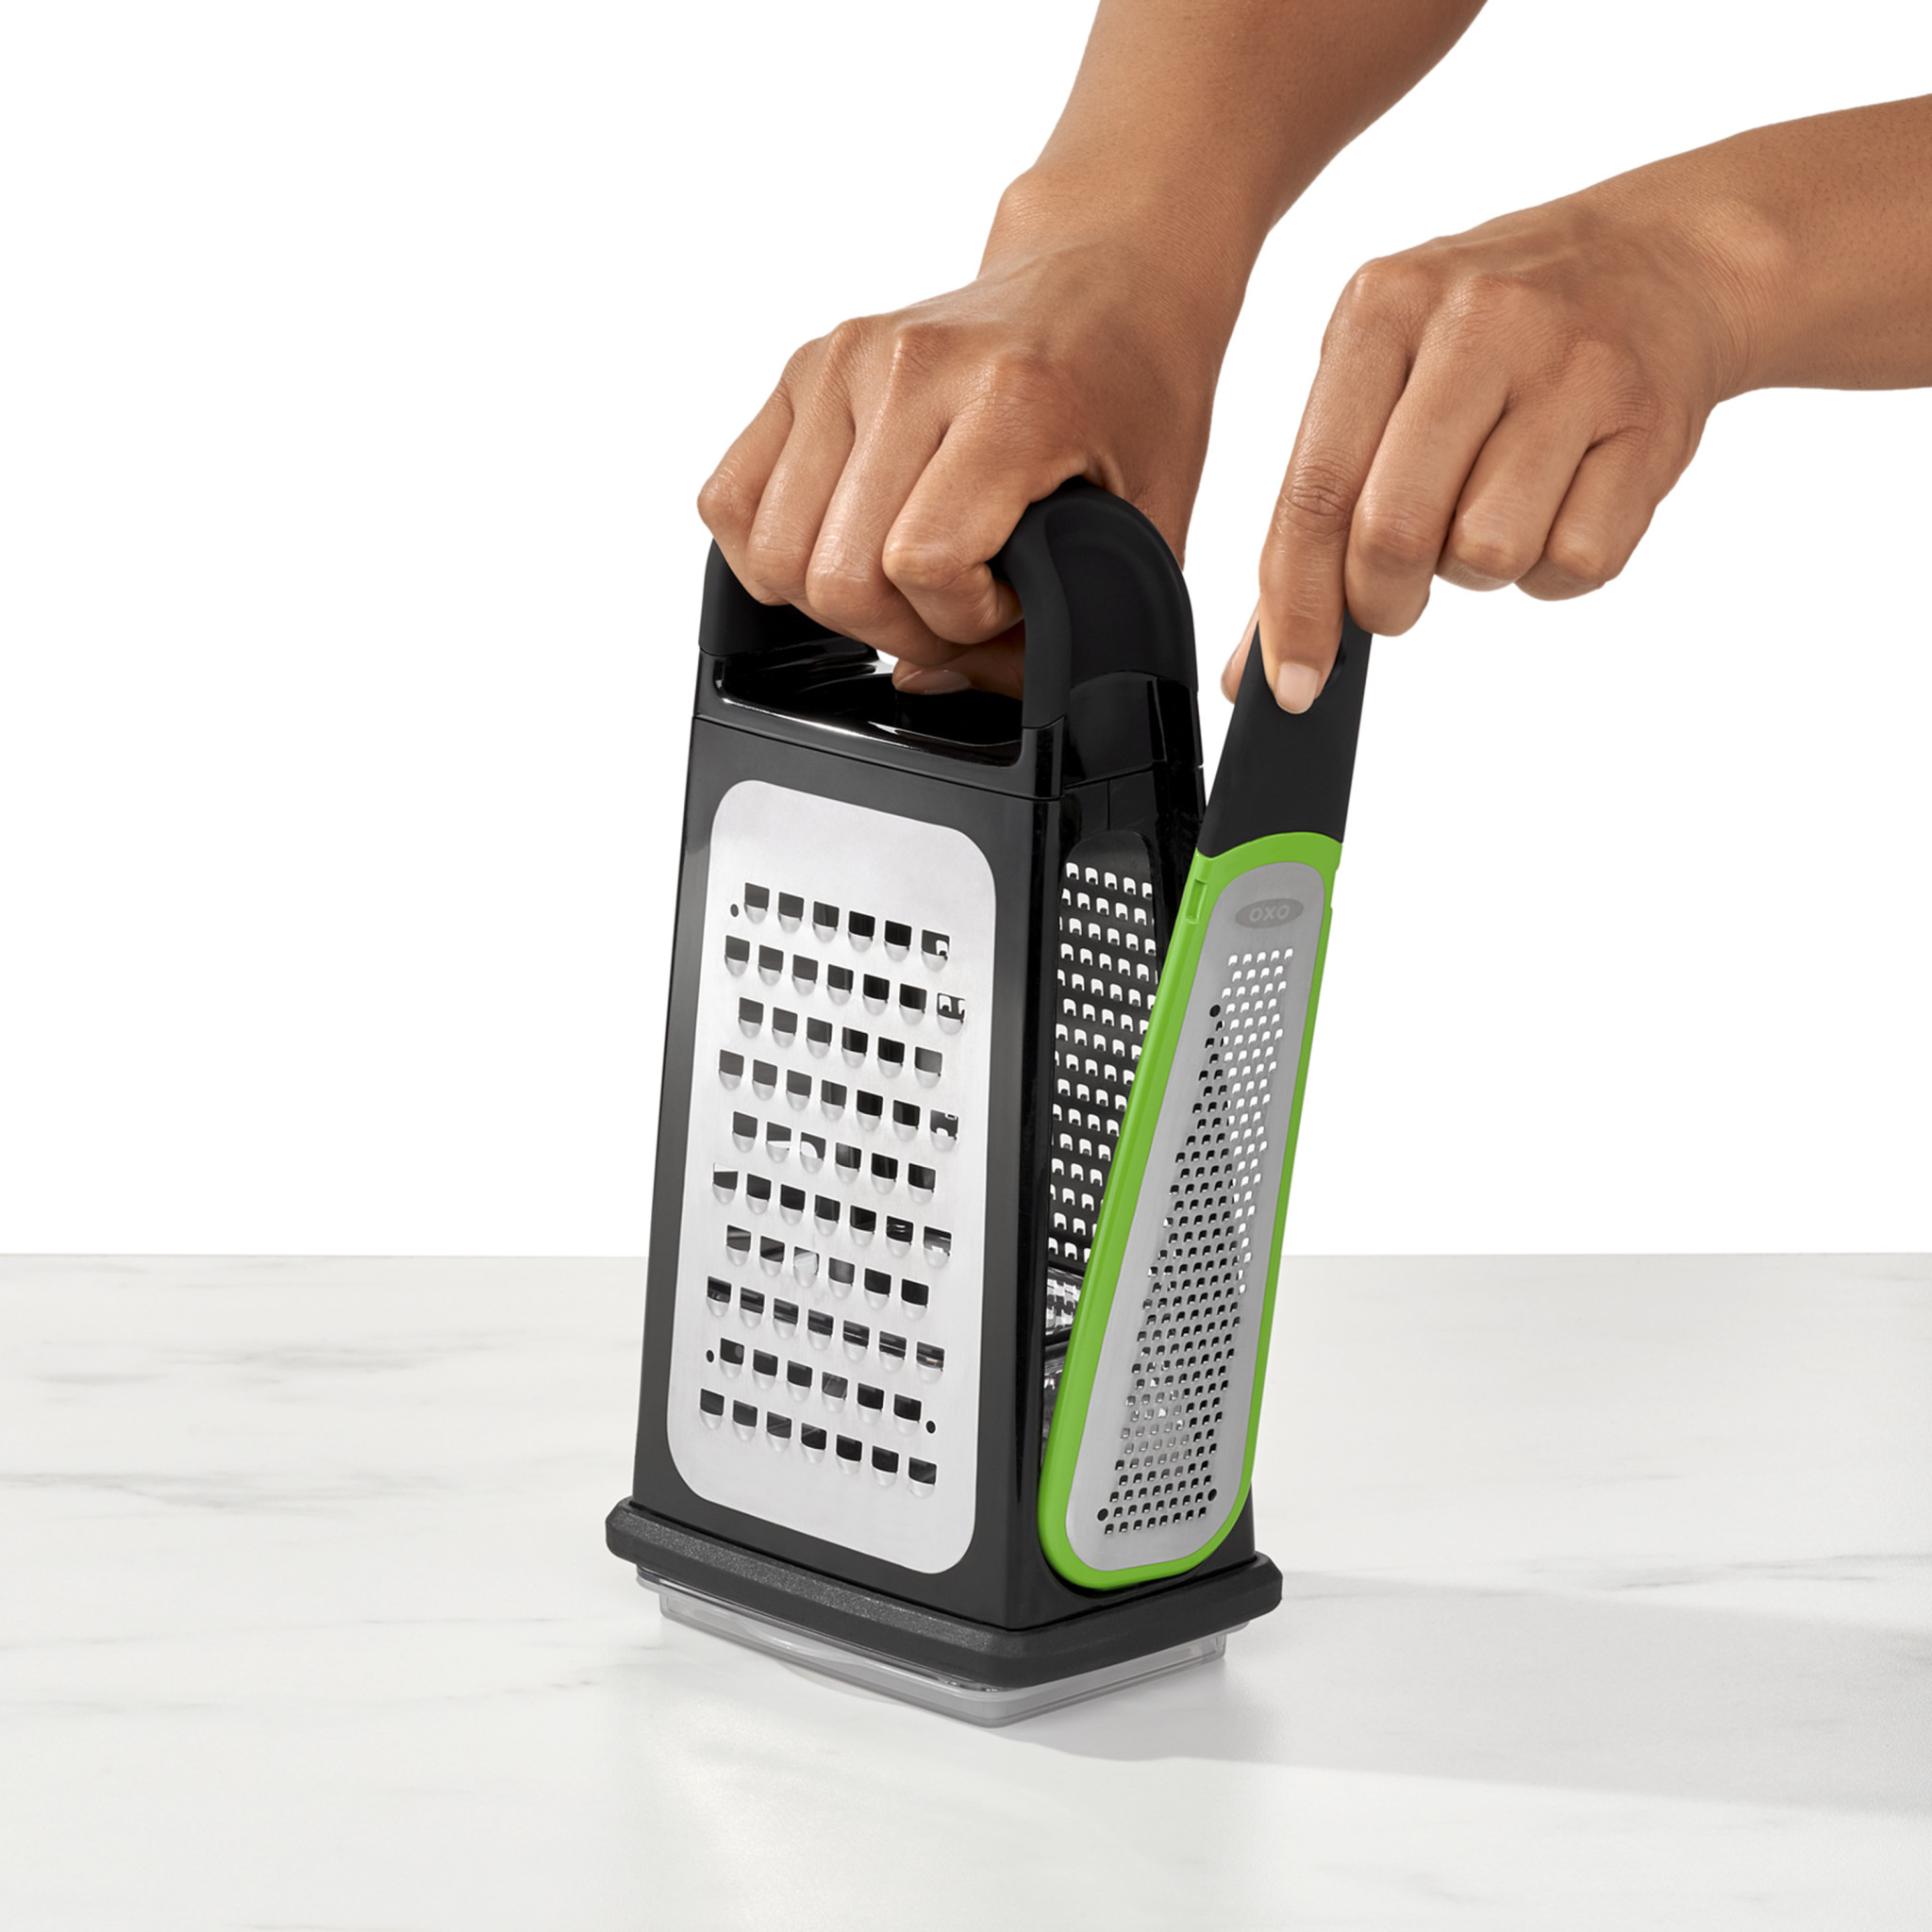 Oxo Good Grips Grater Box with Storage